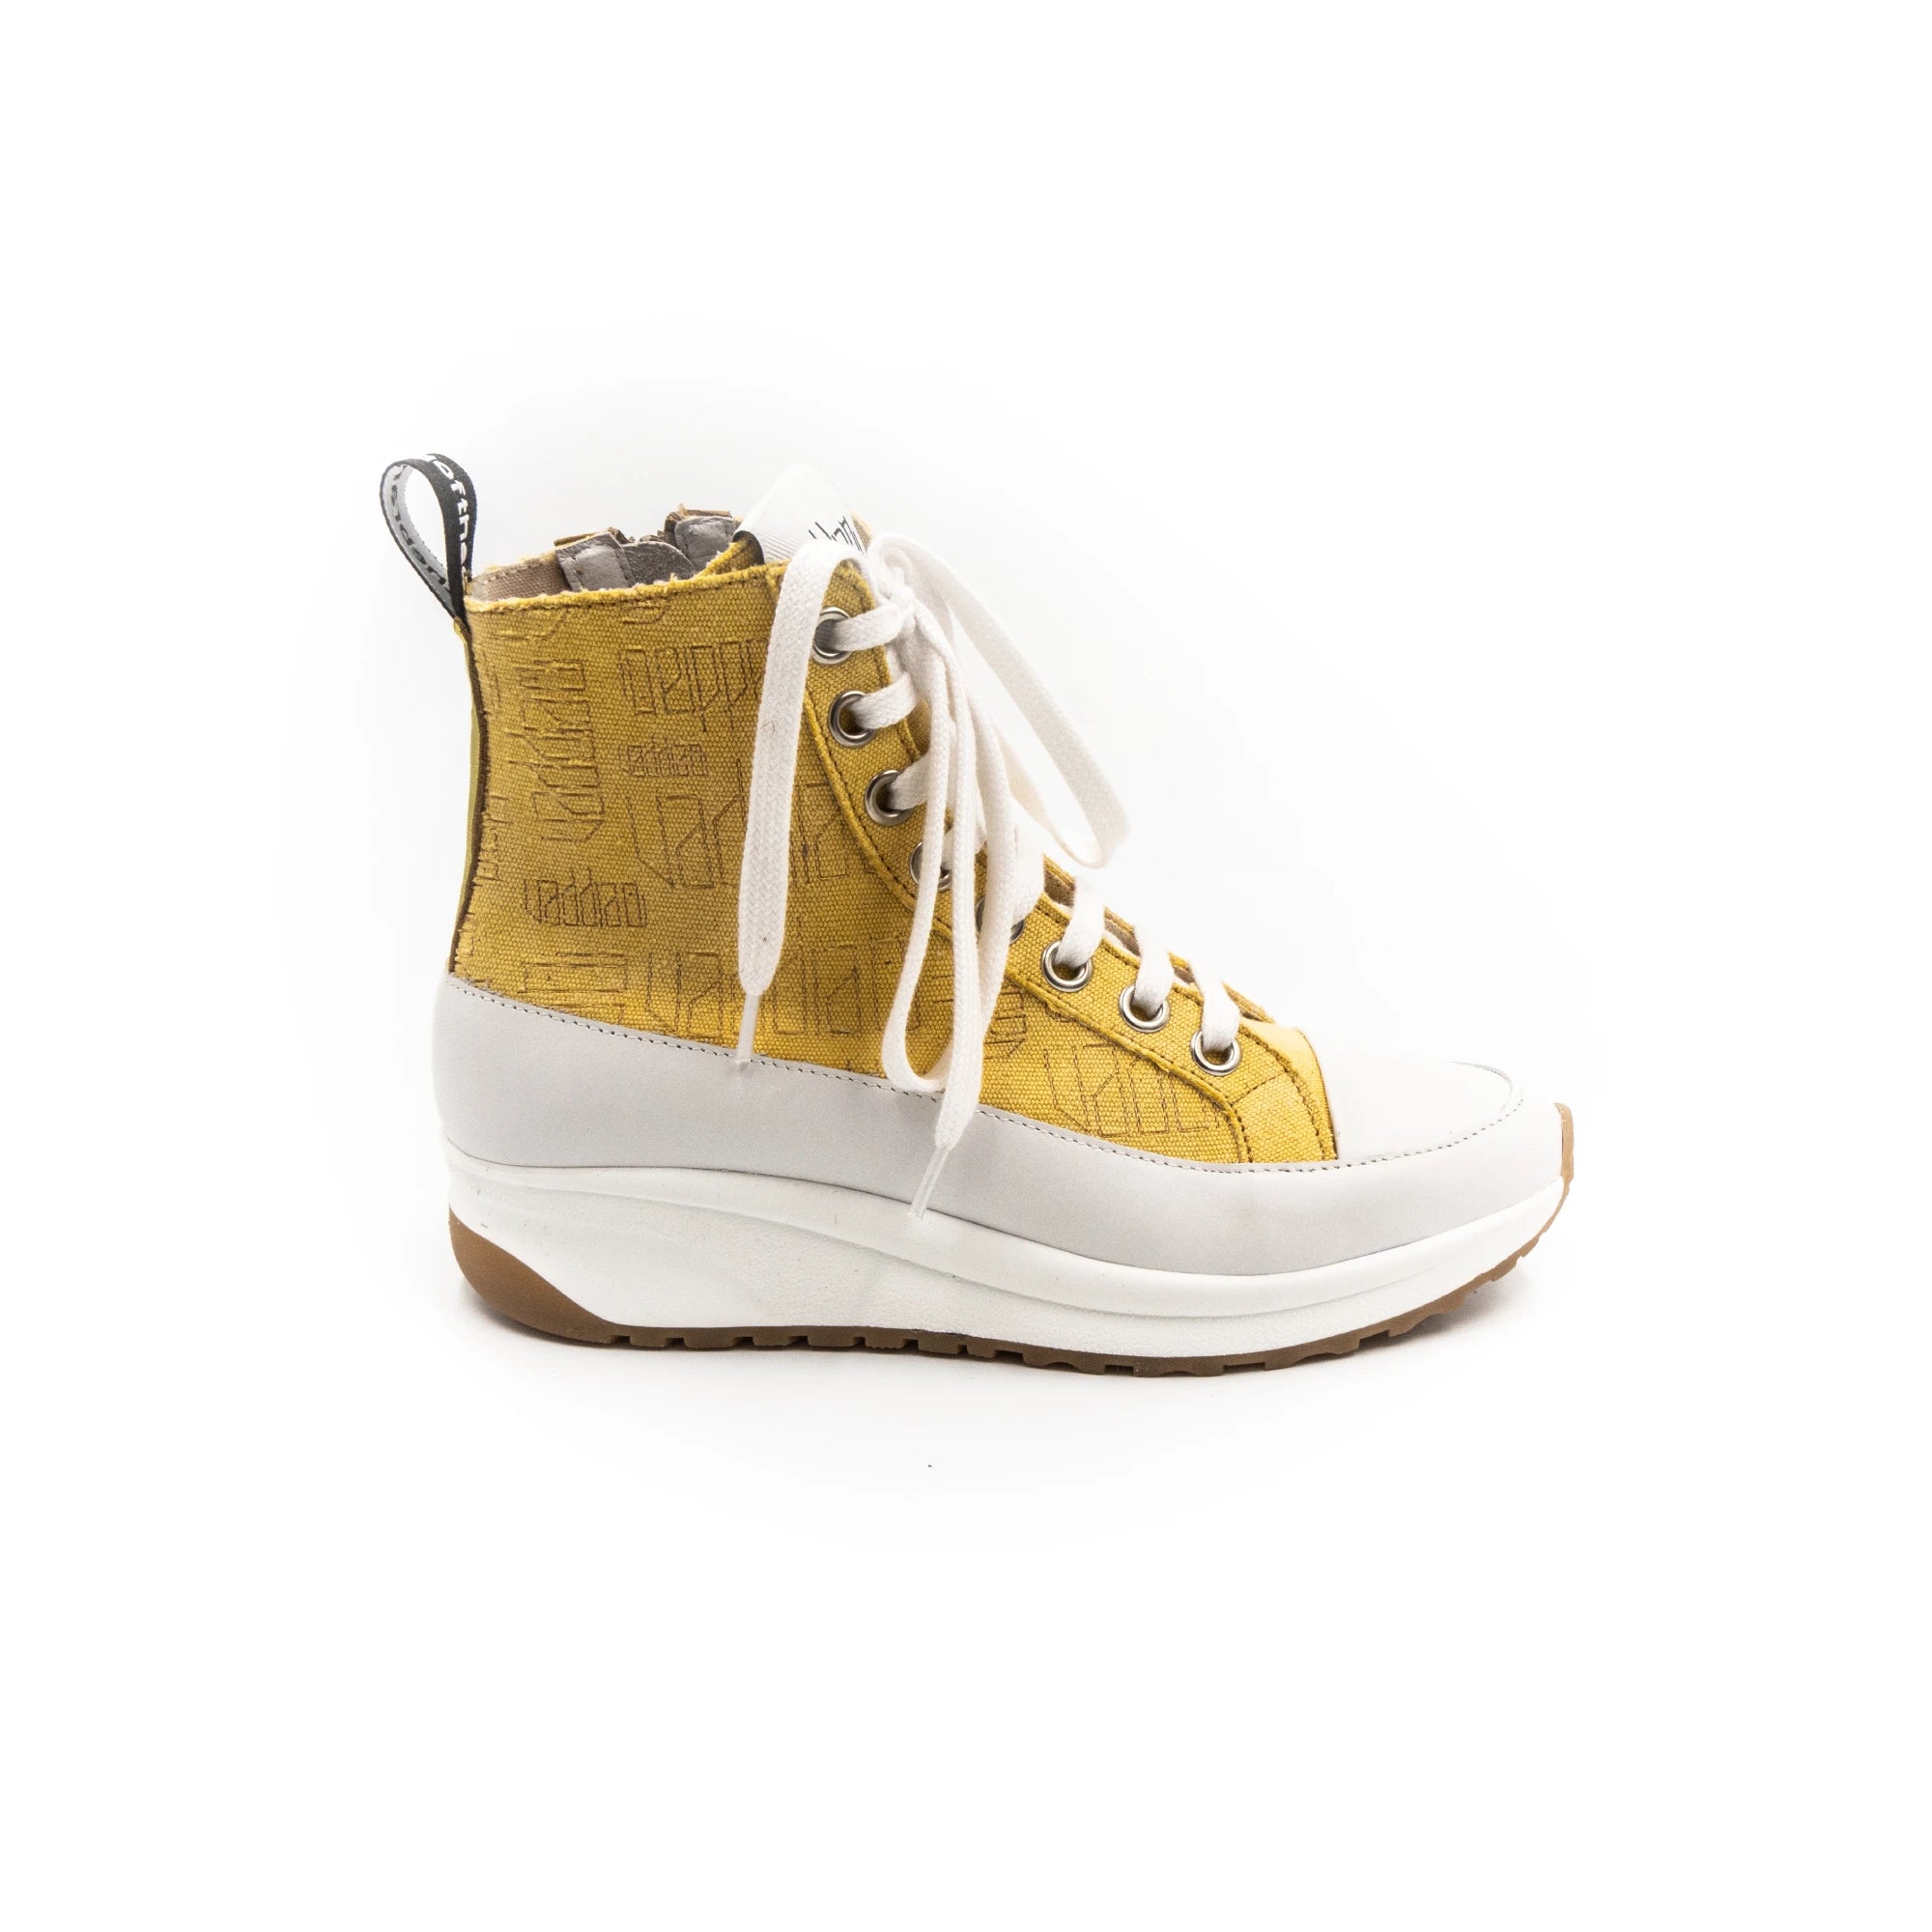 High-top sneakers in yellow.